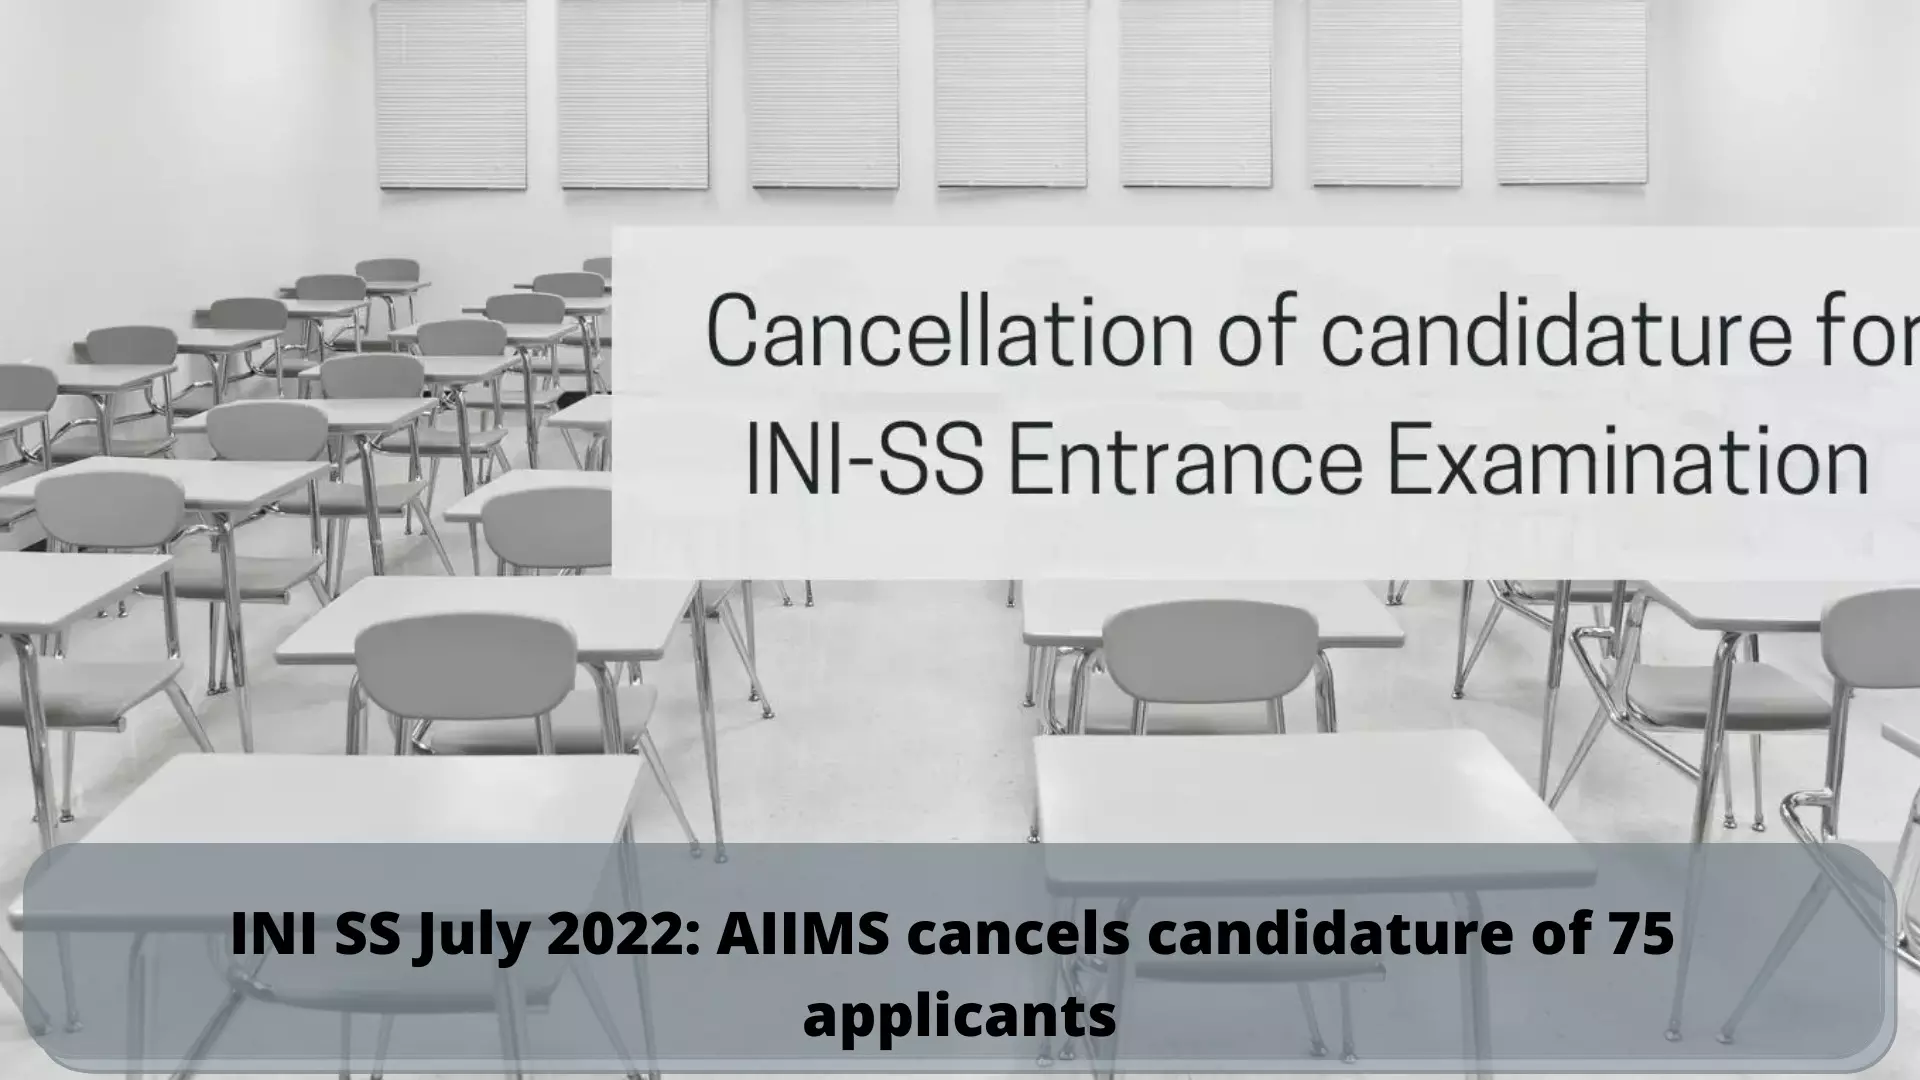 INI SS July 2022: AIIMS cancels candidature of 75 applicants